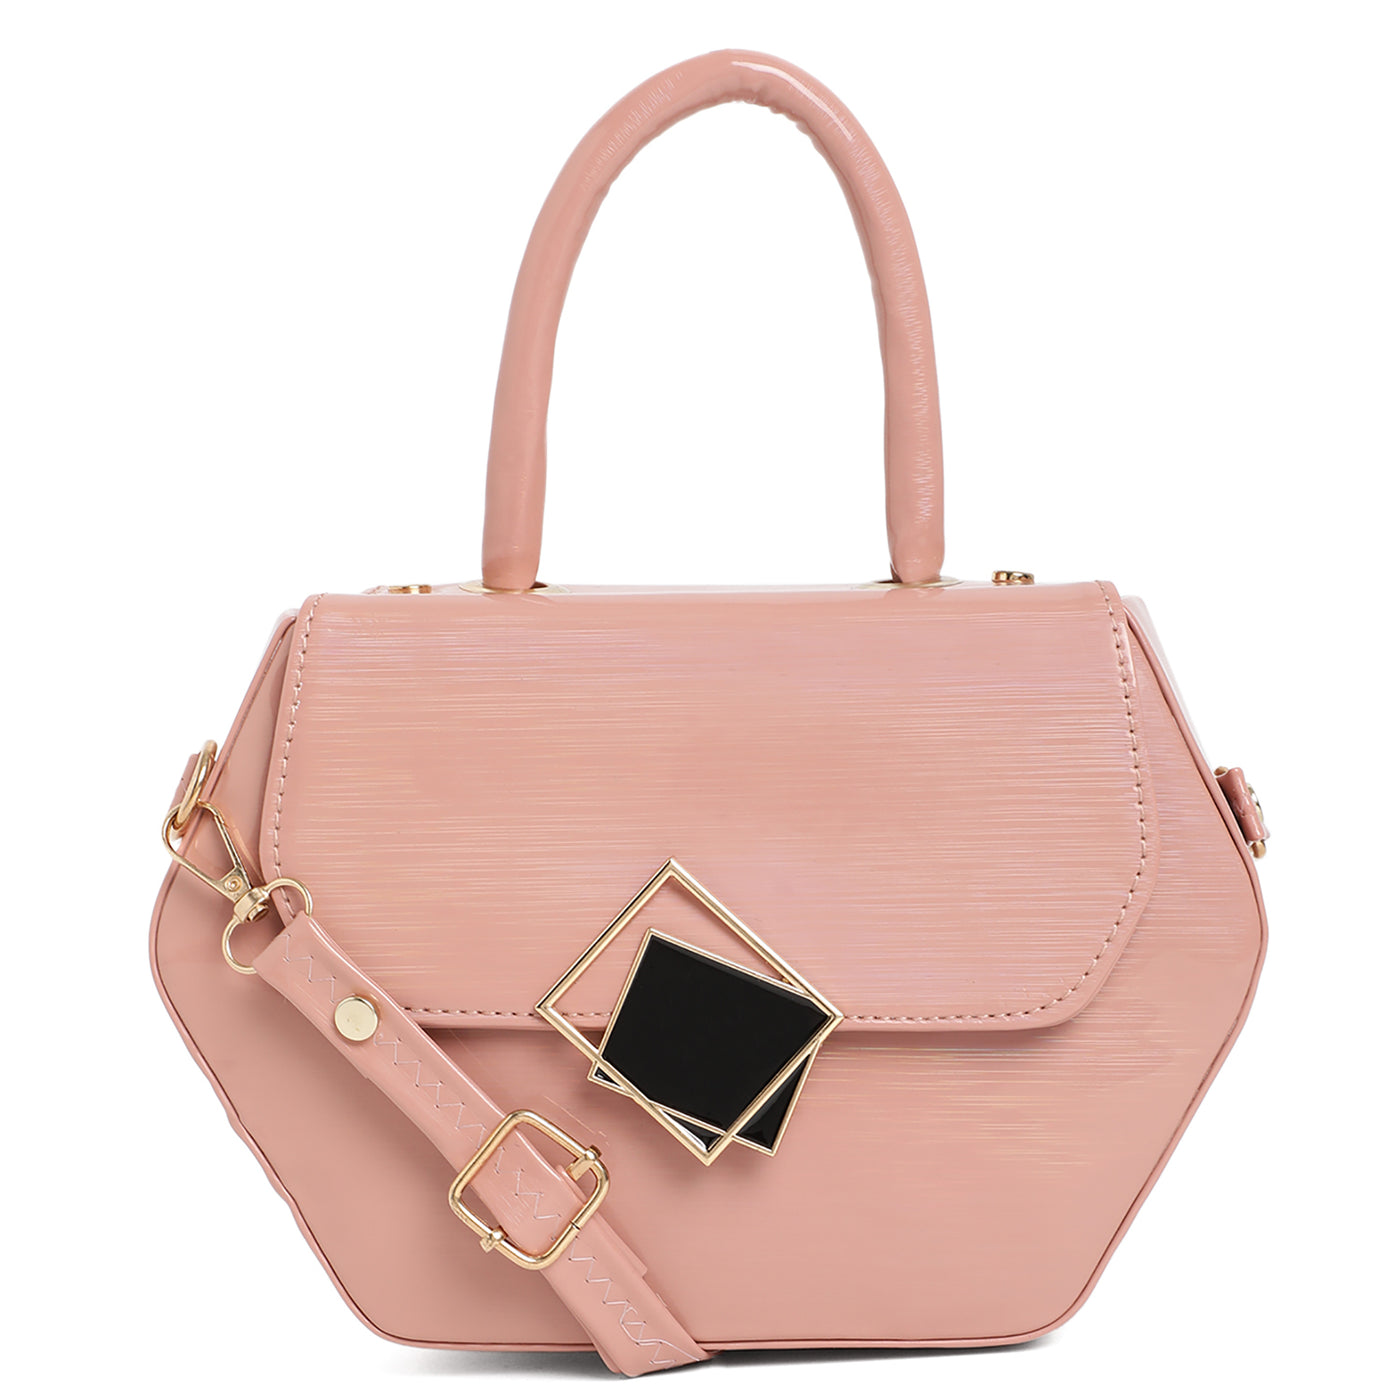 Athena Women Peach-Colored Structured Handheld Bag - Athena Lifestyle